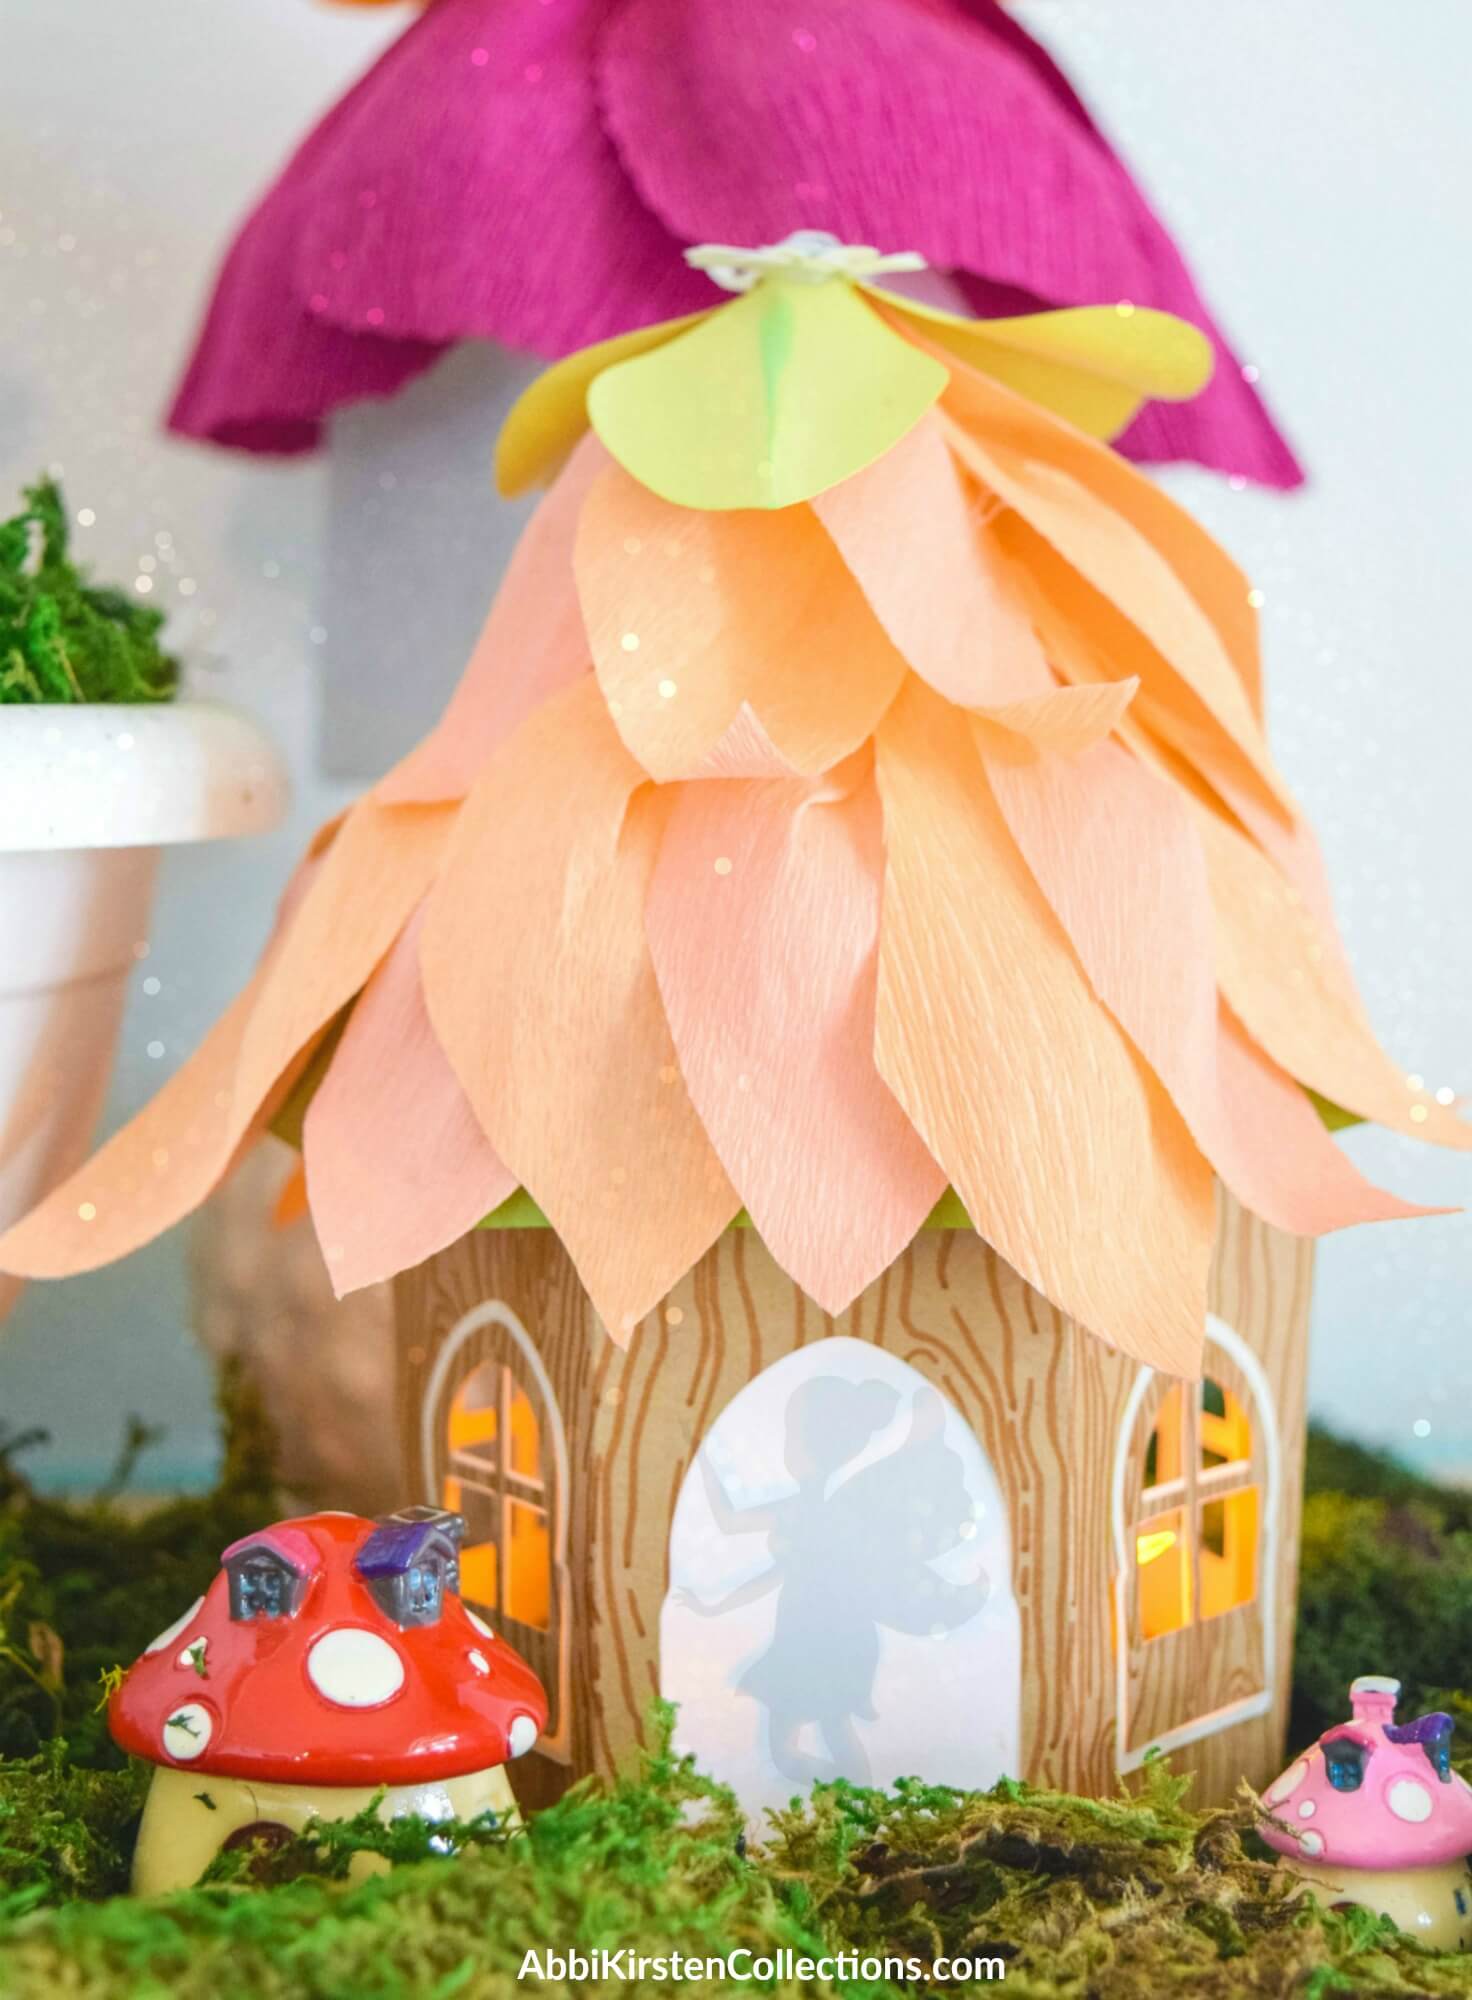 Behind painted mushrooms sits a paper fairy house with debossed paper walls and peach colored crepe paper flower petals for a roof. The silhouette of a fairy is seen in the doorway. 